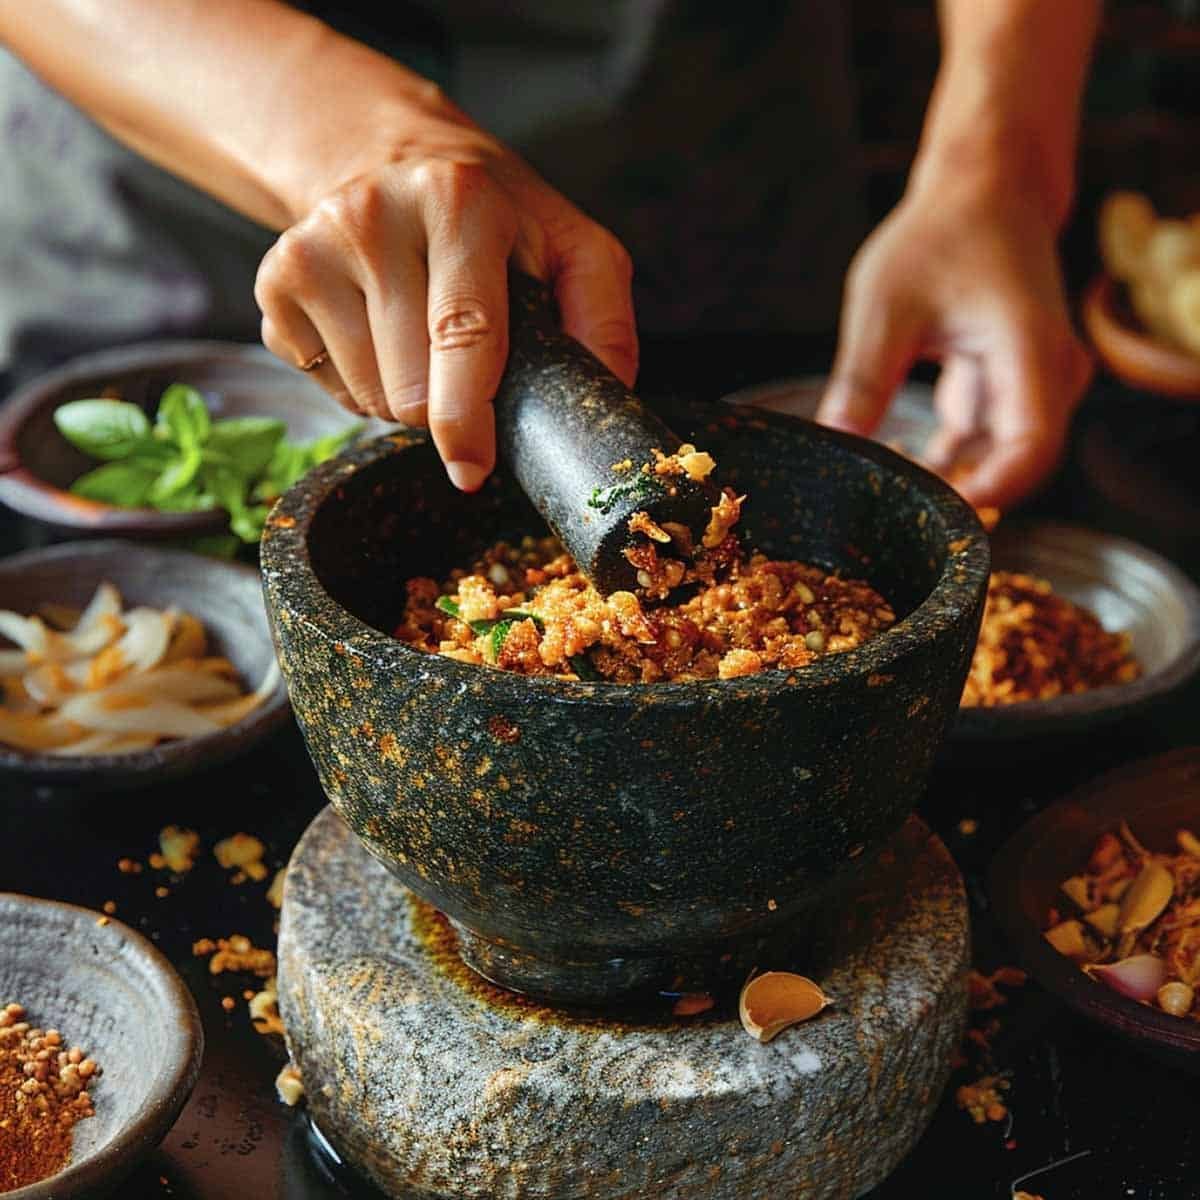 Ingredients  for Thai Chili Paste are ground into a paste using a mortar and pestle, blending flavors for traditional Thai Nam Prik Pao.